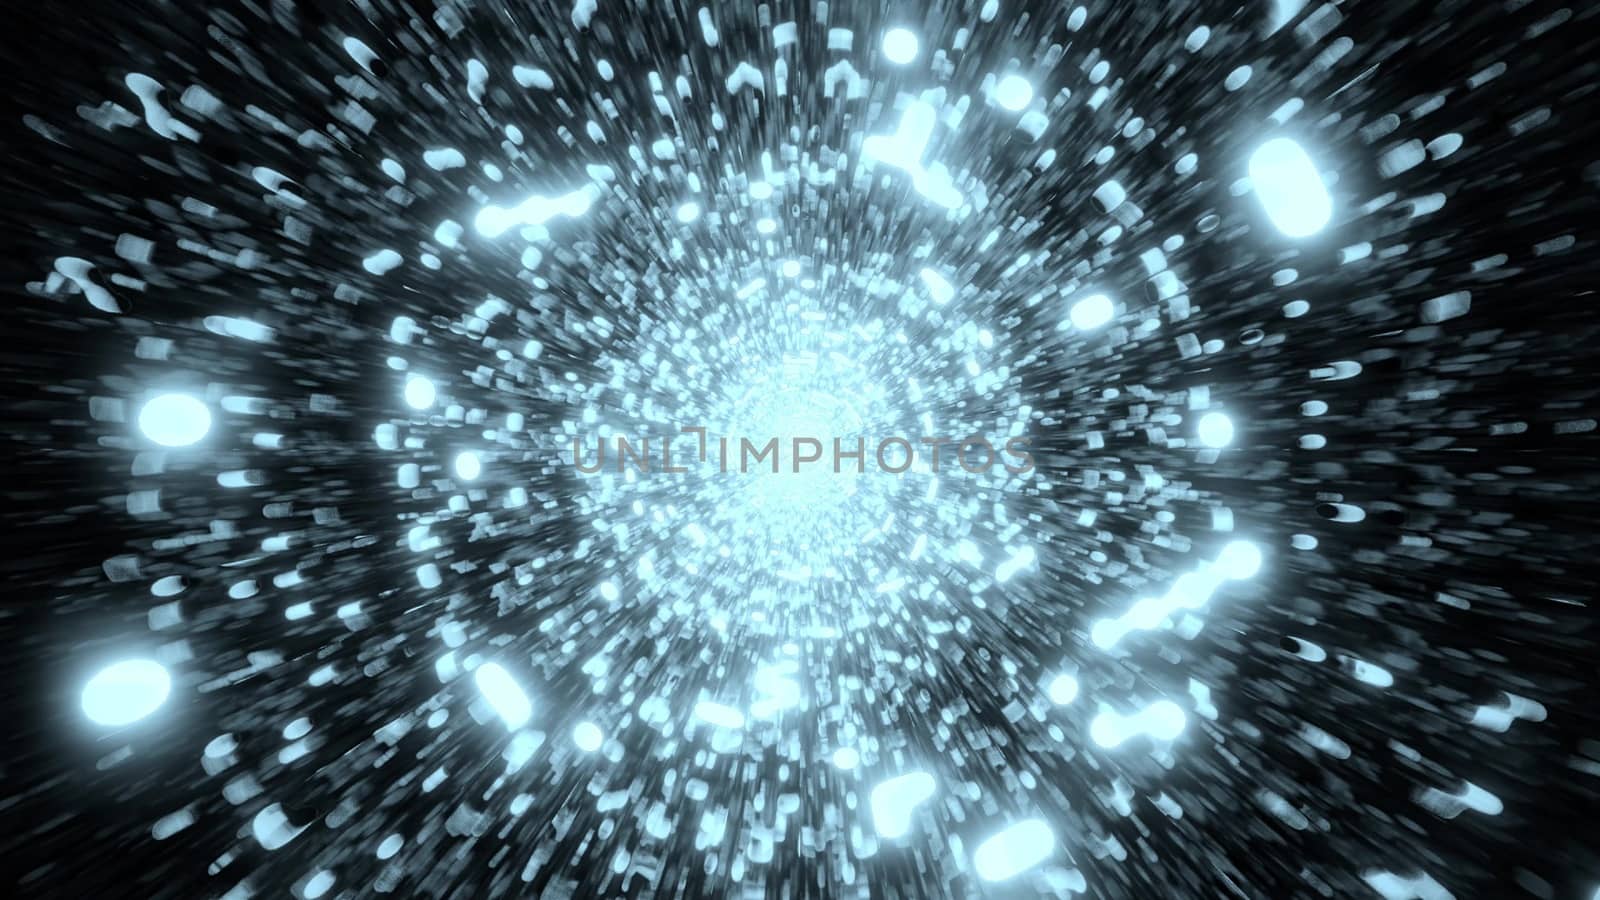 abstract silver design galaxy 3d illustration background wallpaper, abstract time travel 3d rendering